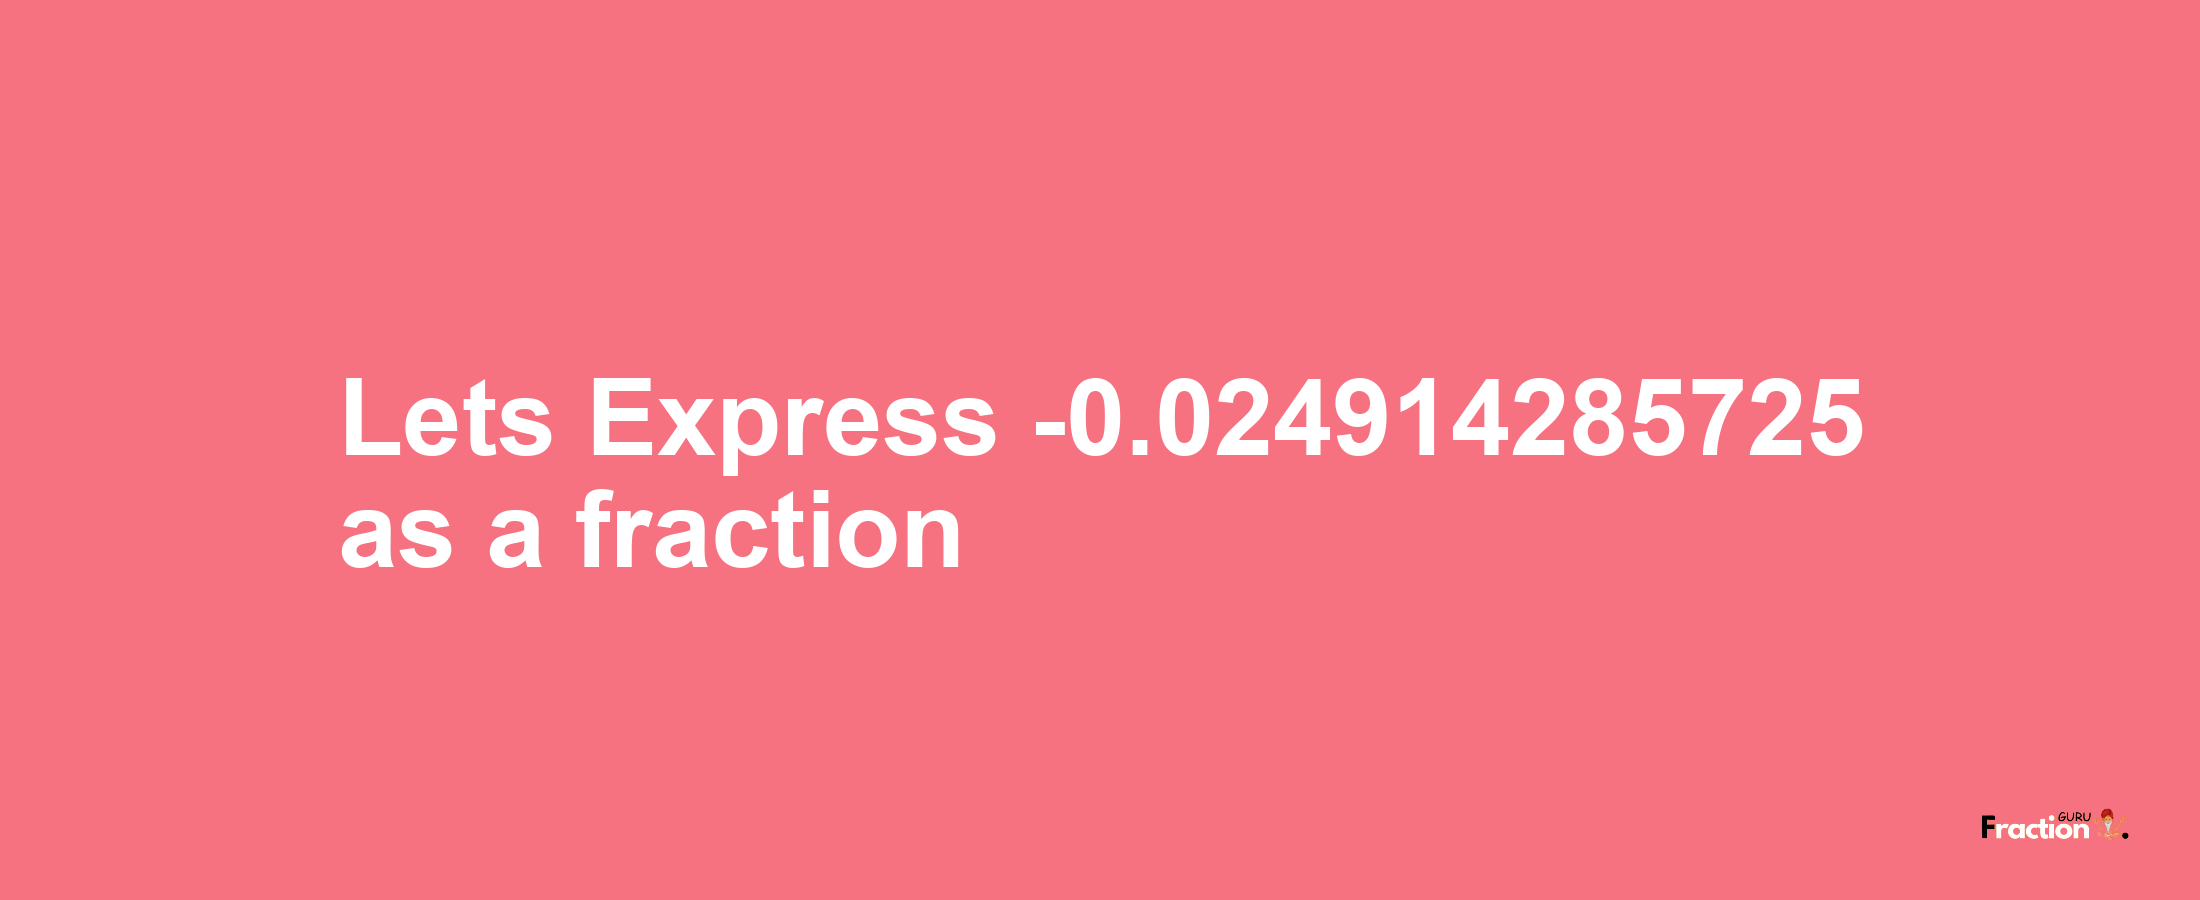 Lets Express -0.024914285725 as afraction